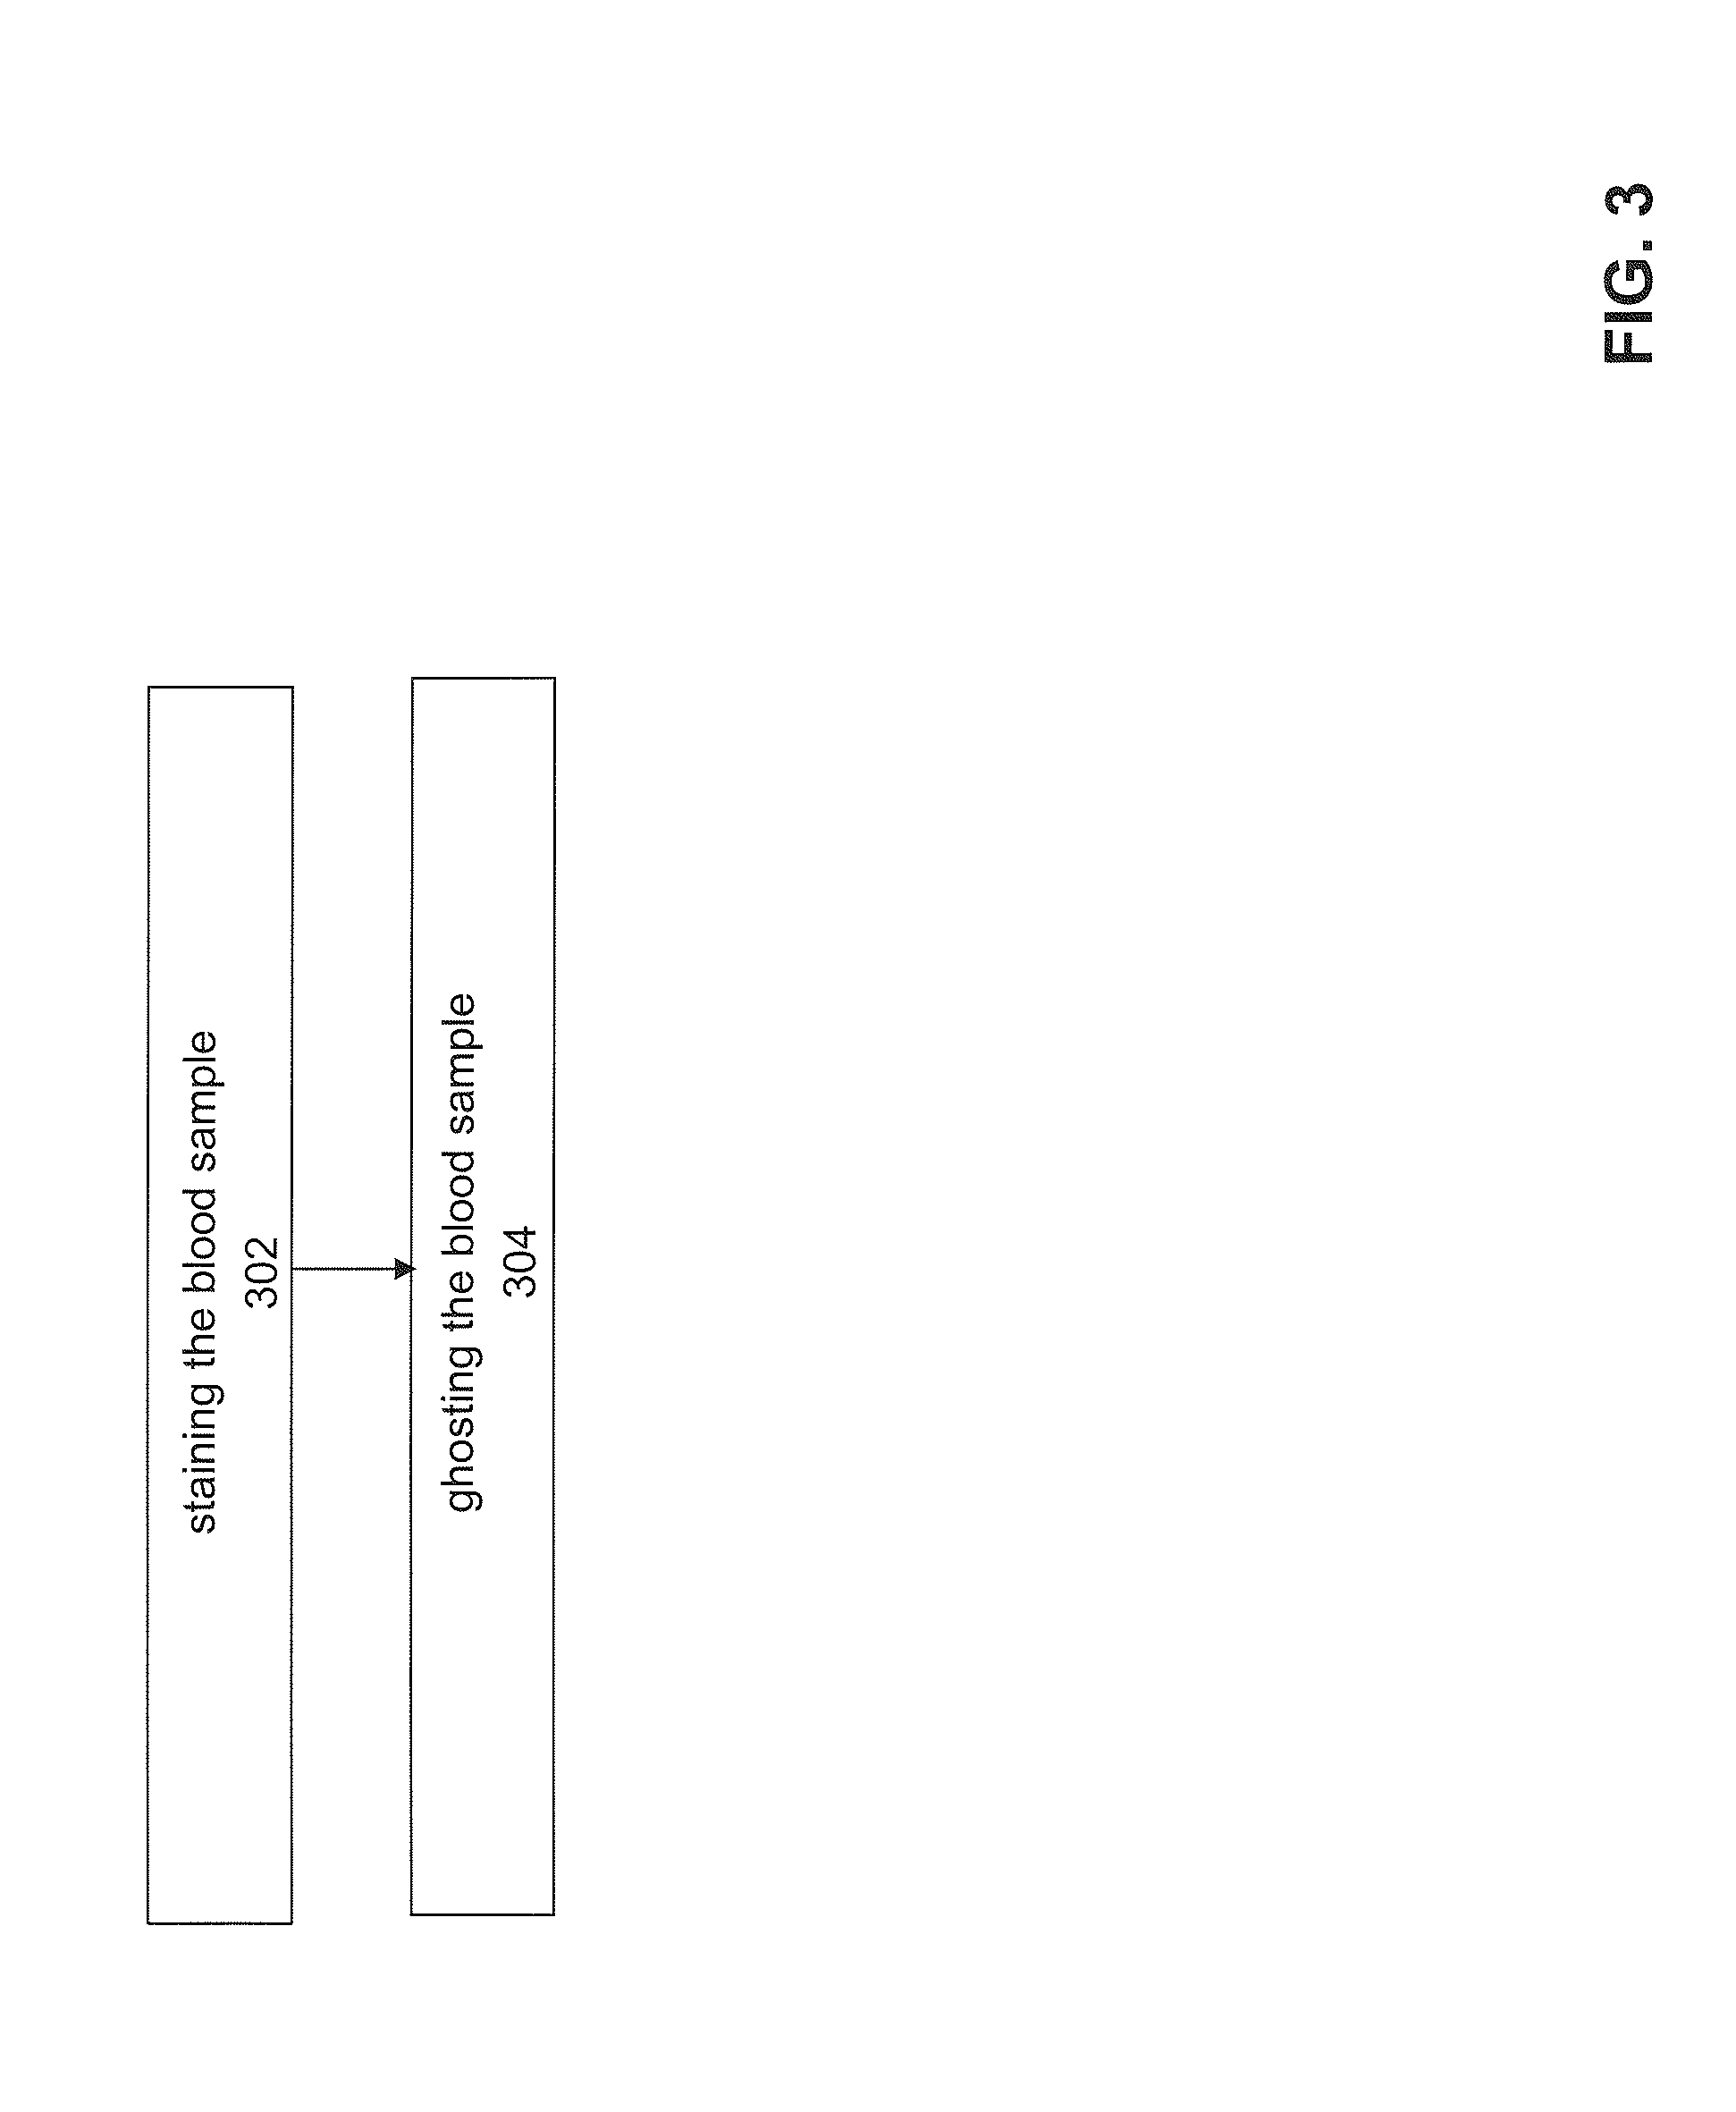 Method and System for Analyzing a Blood Sample